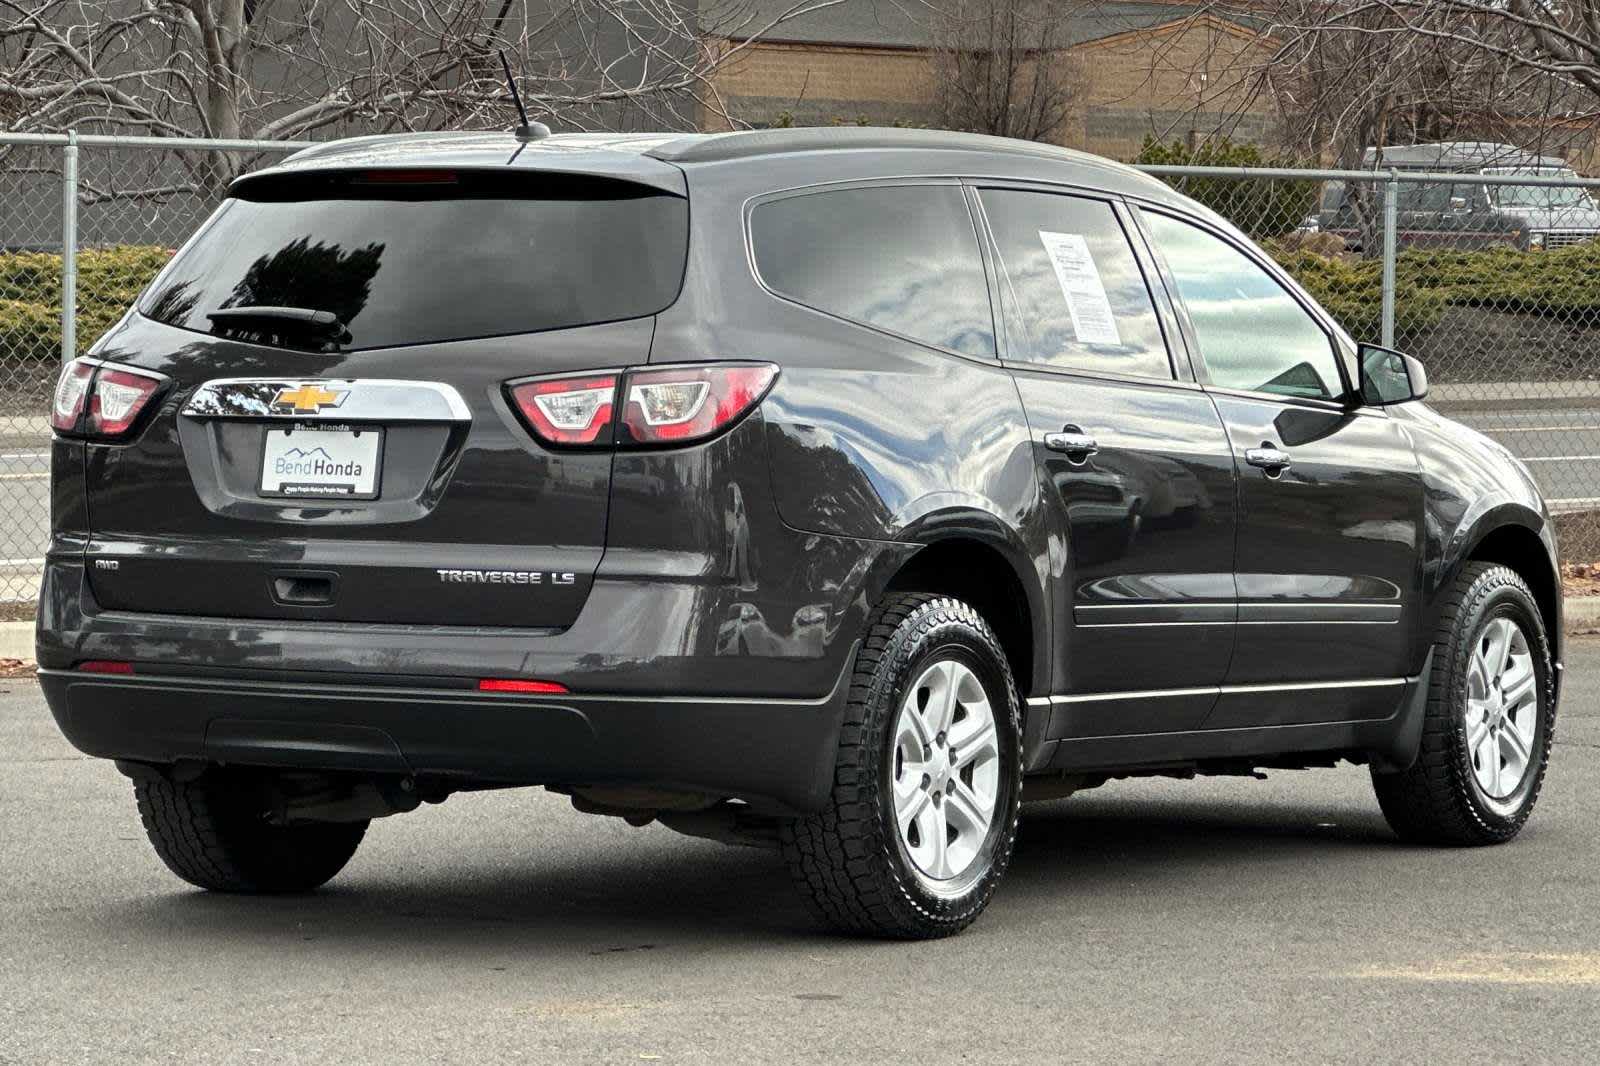 Used 2014 Chevrolet Traverse LS with VIN 1GNKVFED5EJ268477 for sale in Bend, OR